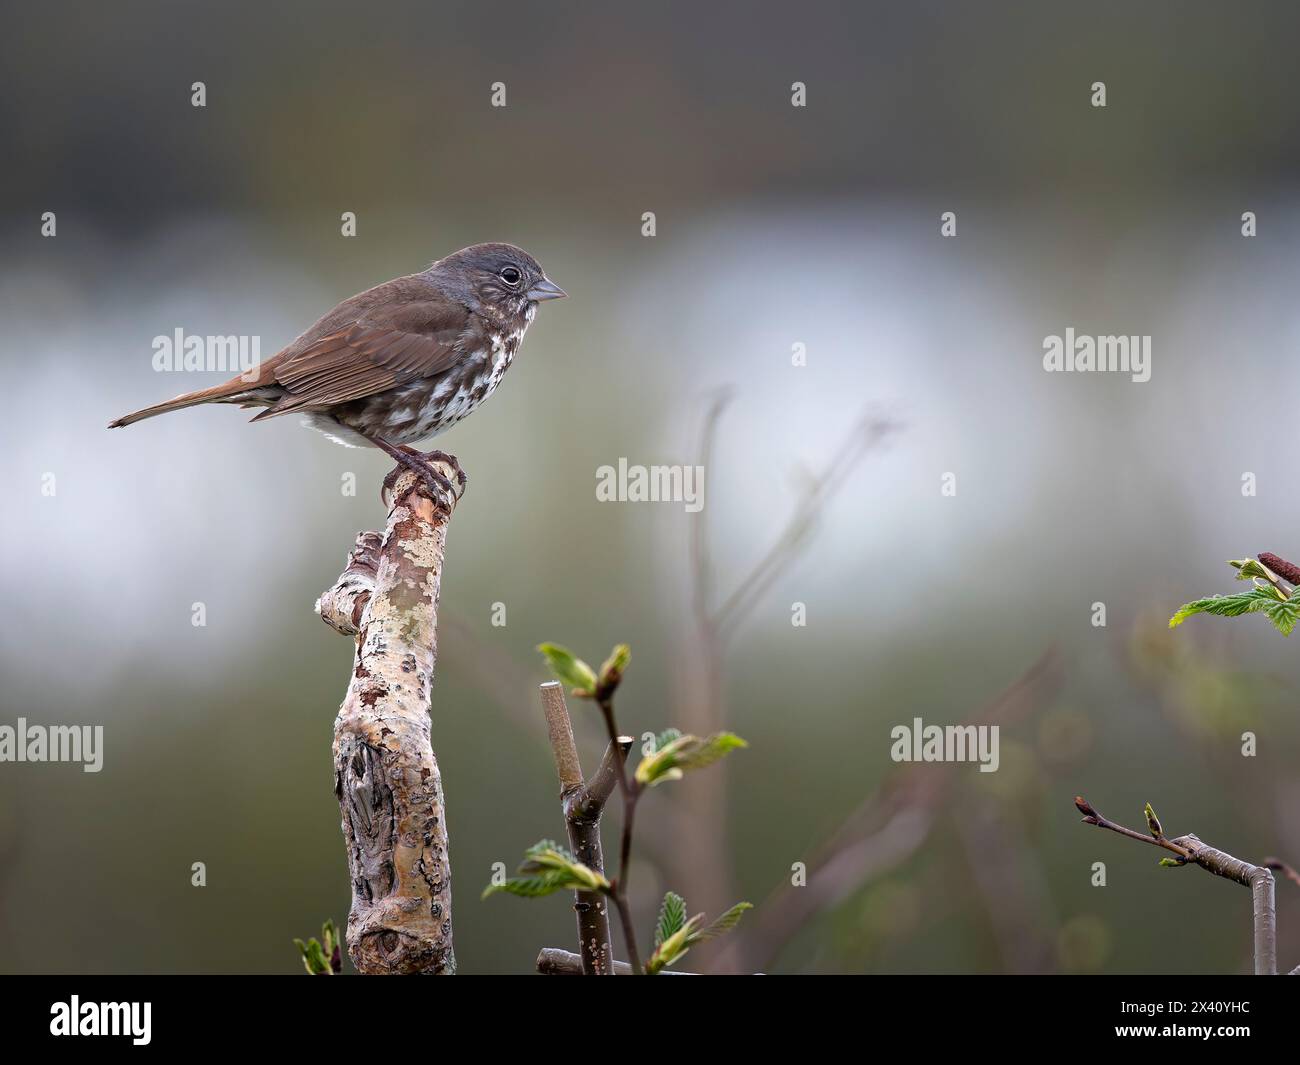 Fox sparrow (Passerella iliaca) guards its nesting territory from competing passerines in this image taken near McNeil Lagoon in Southwest Alaska Stock Photo